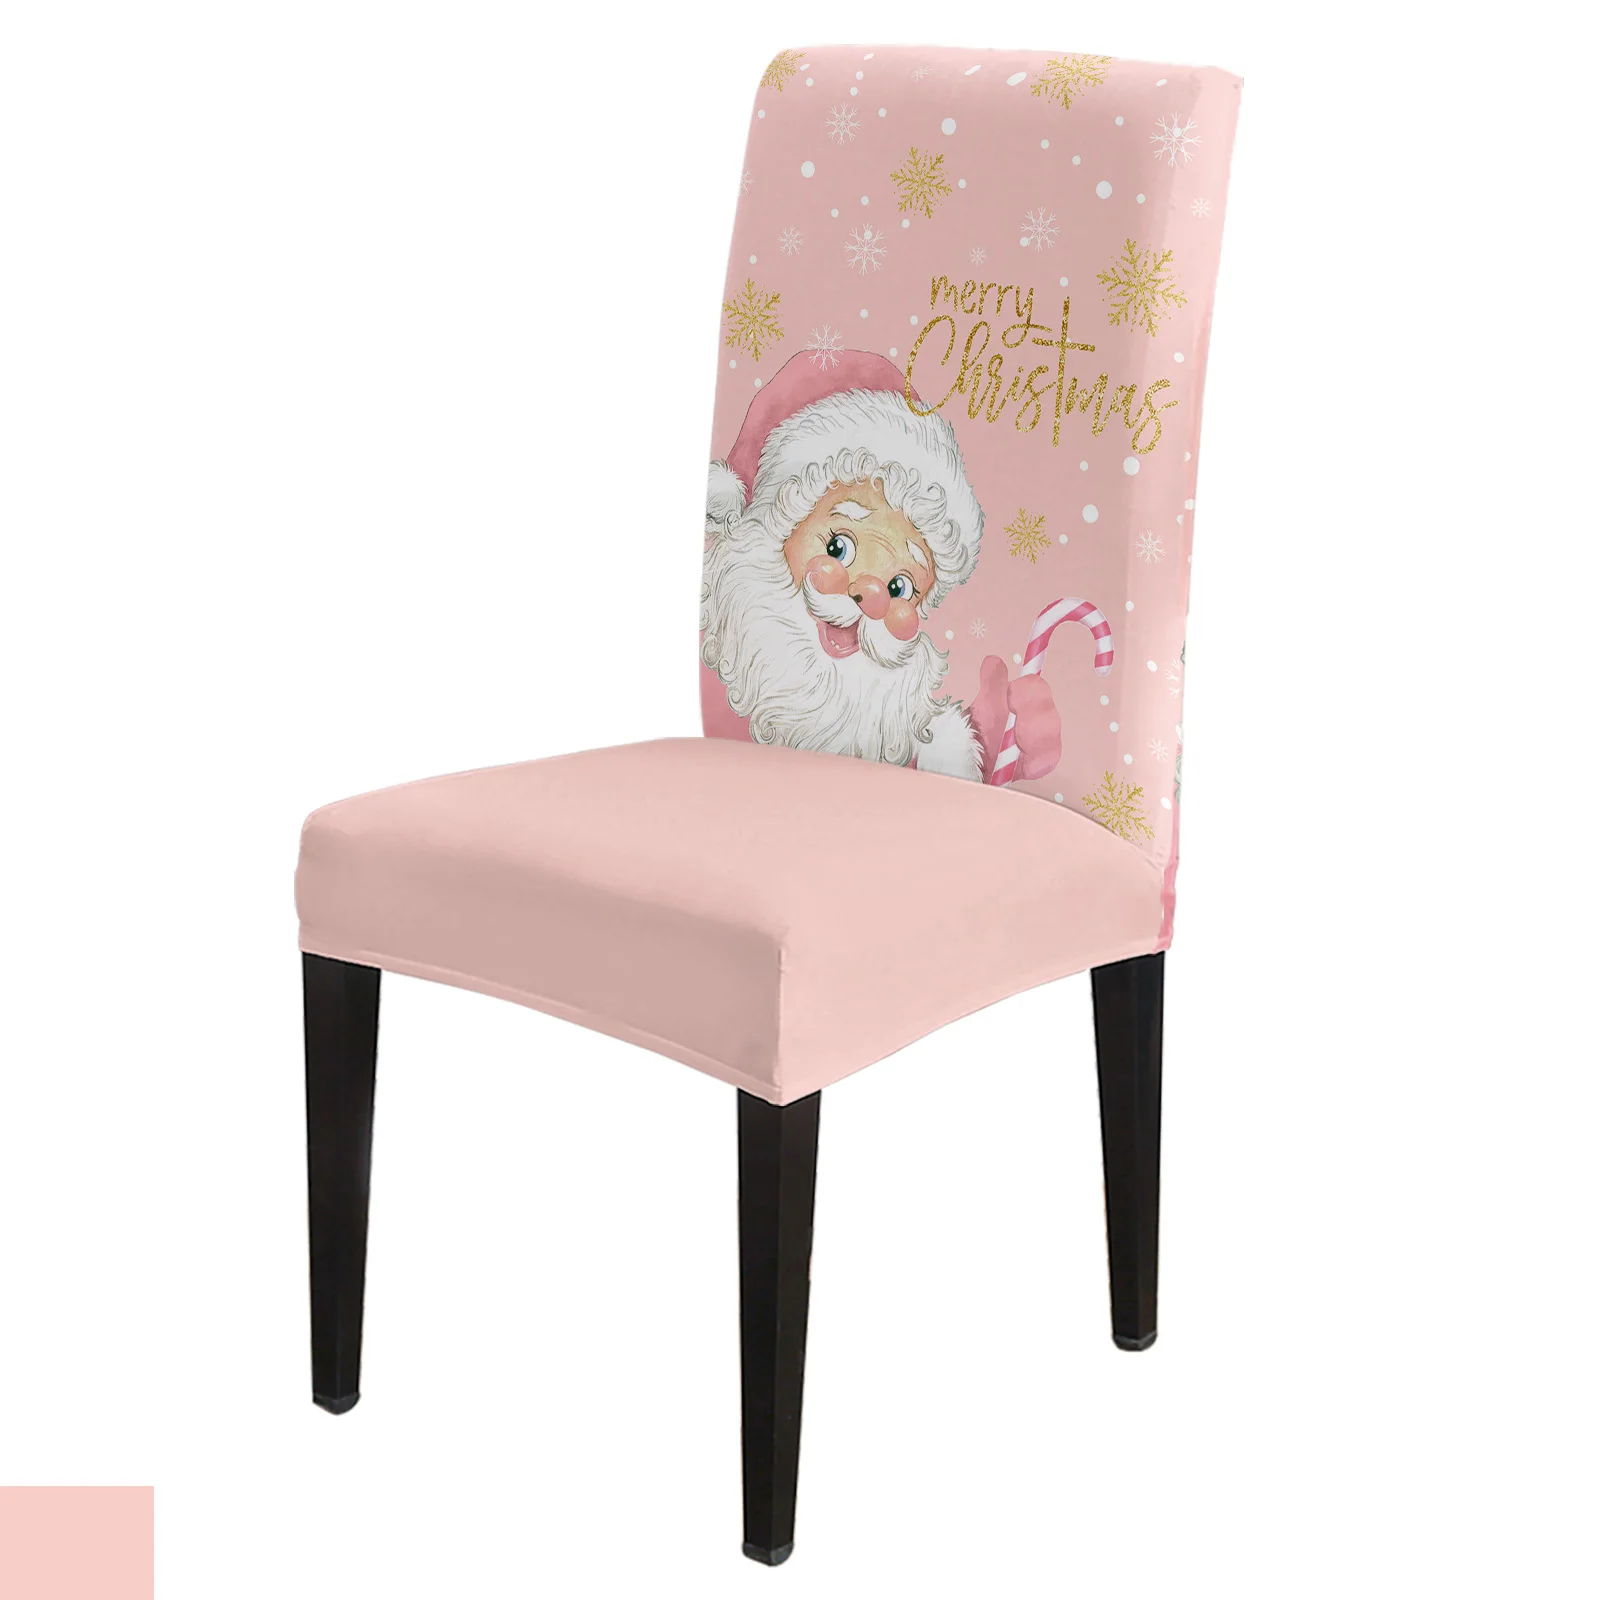 

Christmas Santa Claus Snowflakes Pink Chair Cover Spandex Elastic Dining Chair Slipcover Wedding Festival Stretchy Seat Cover